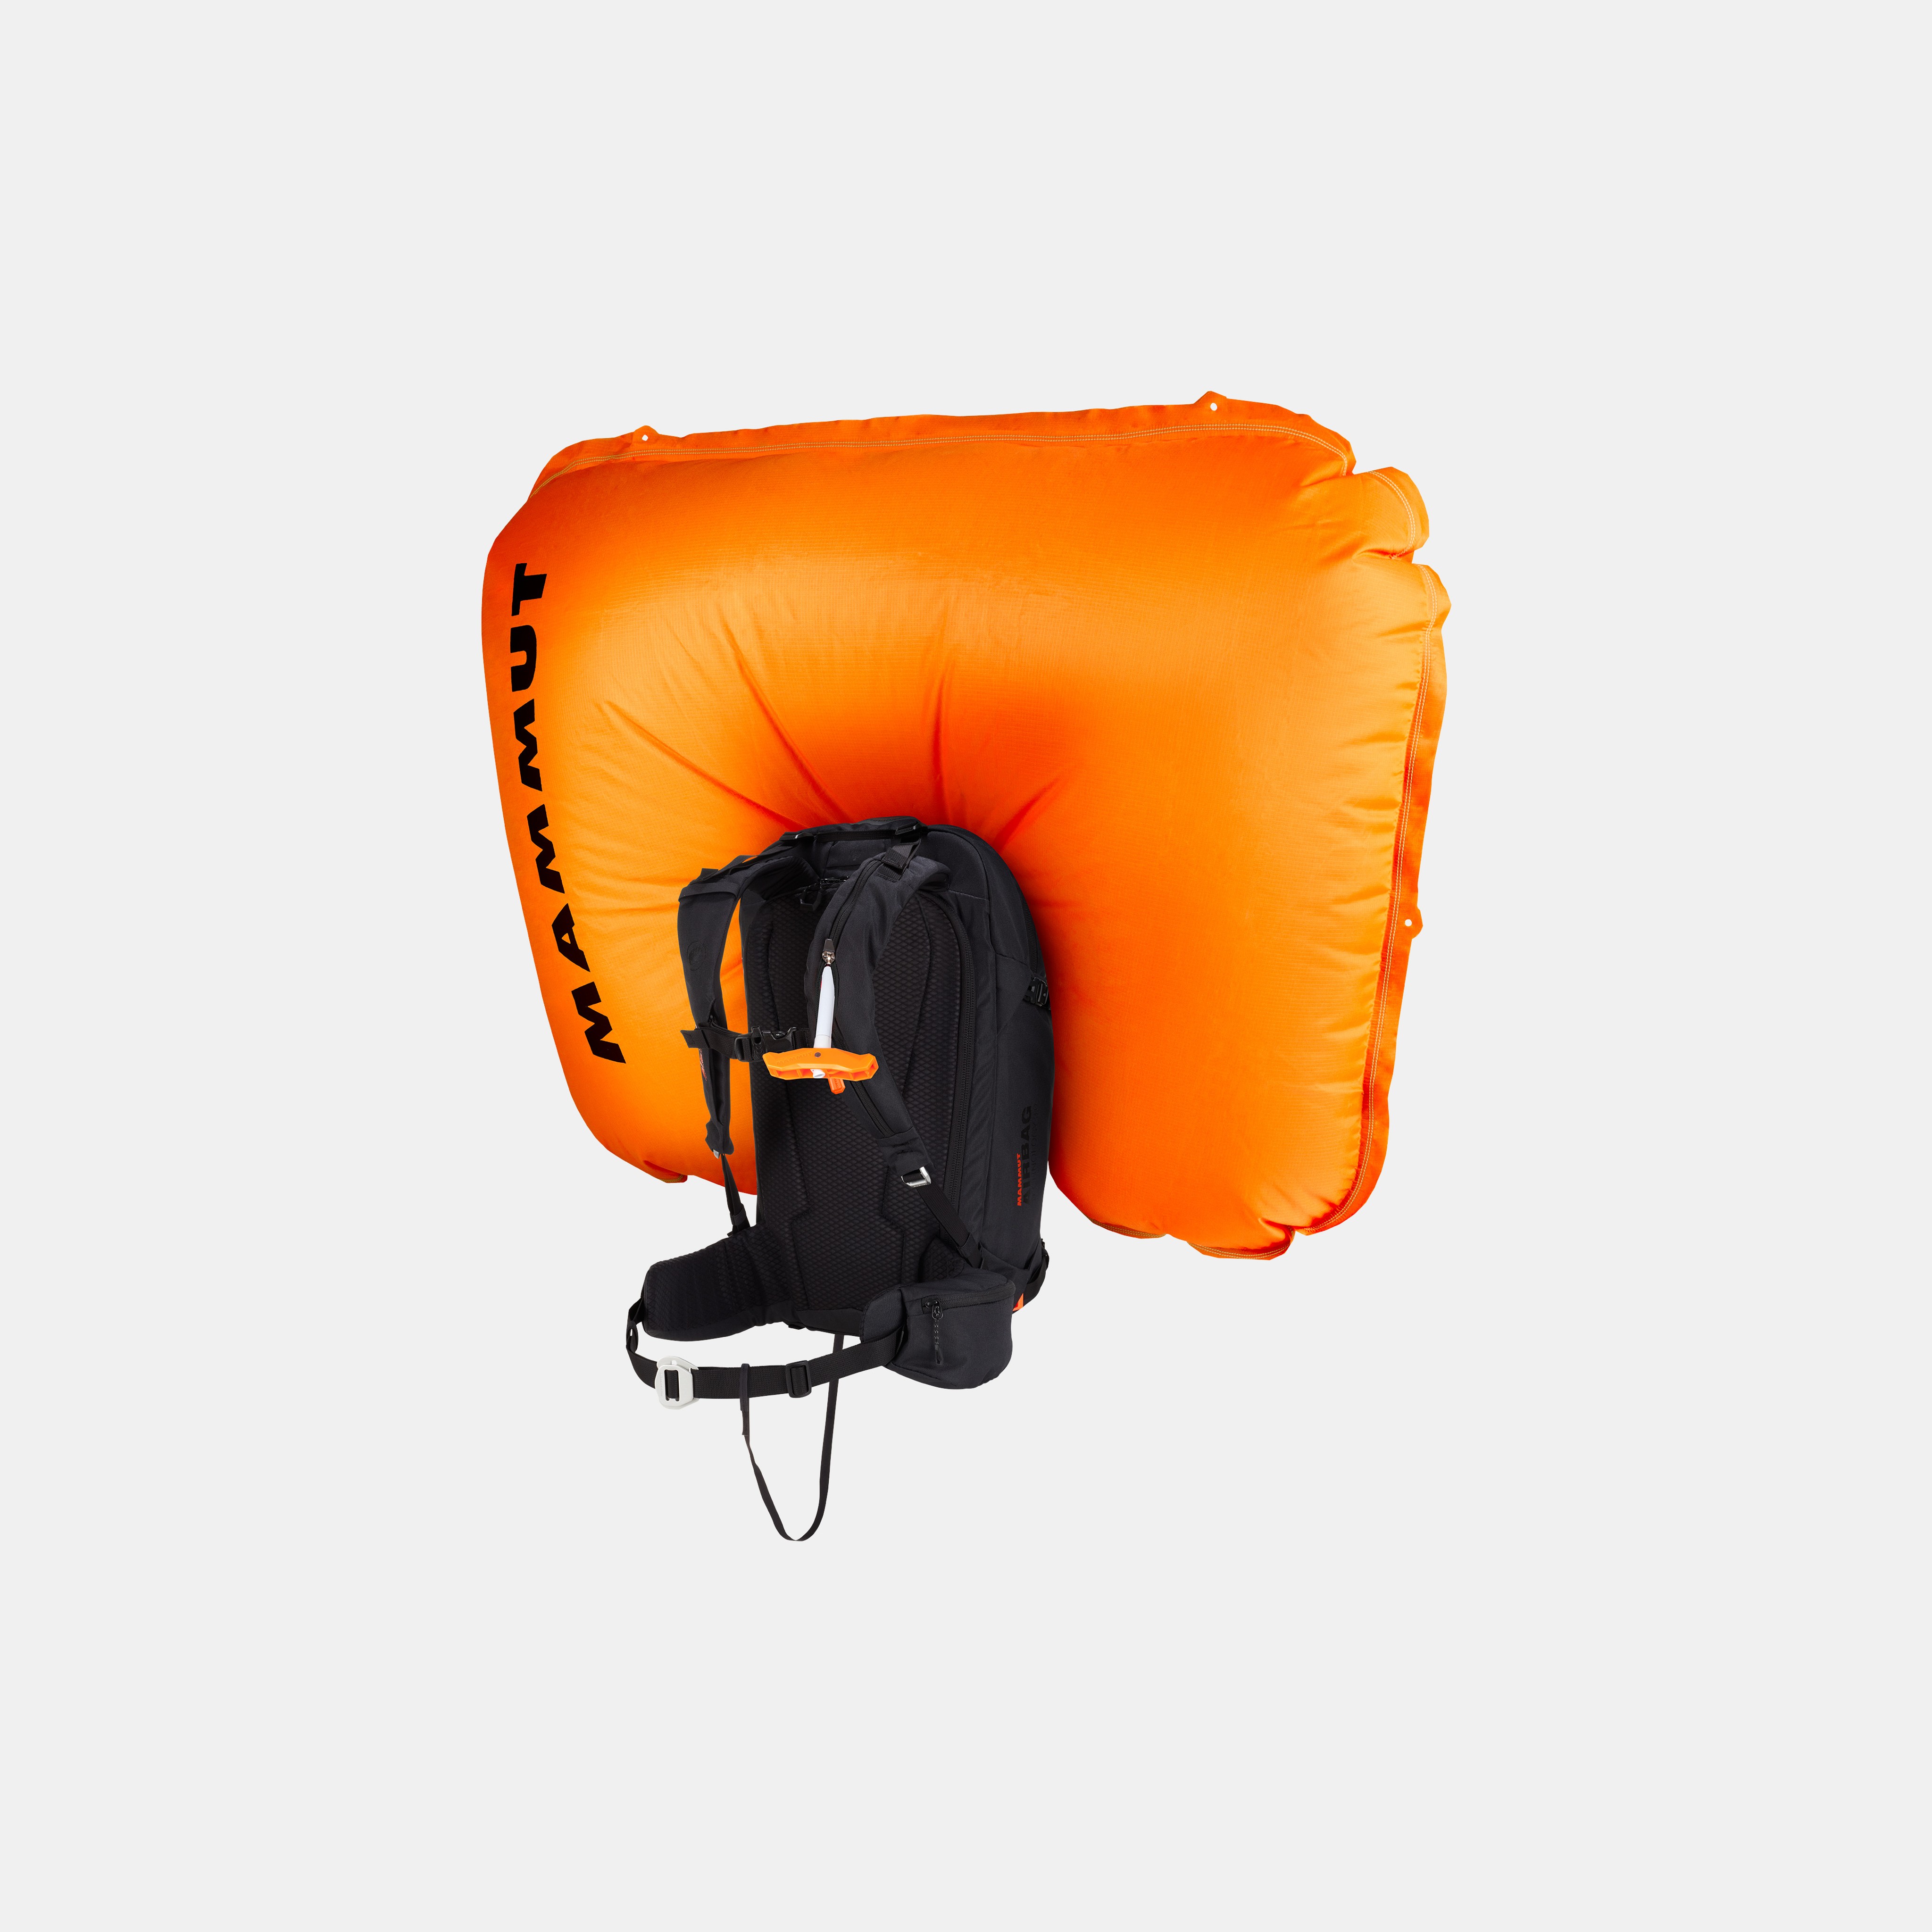 Pro X Removable Airbag 3.0 product image